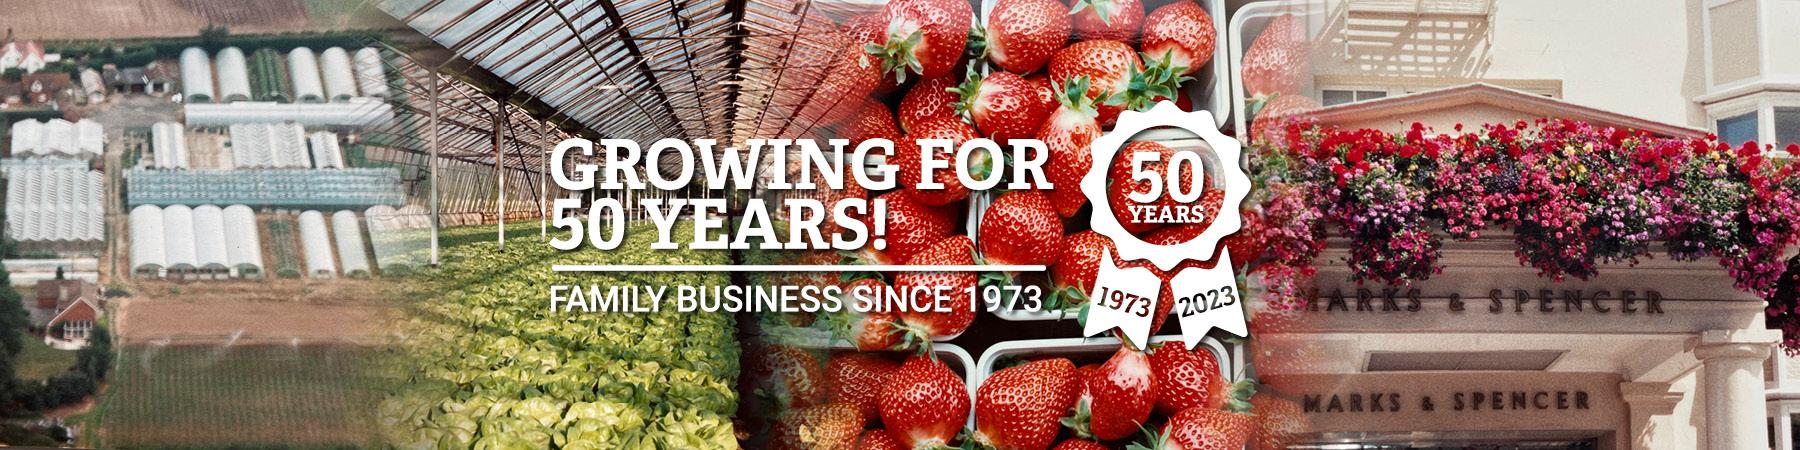 Growing For 50 Years! Family Business Since 1973